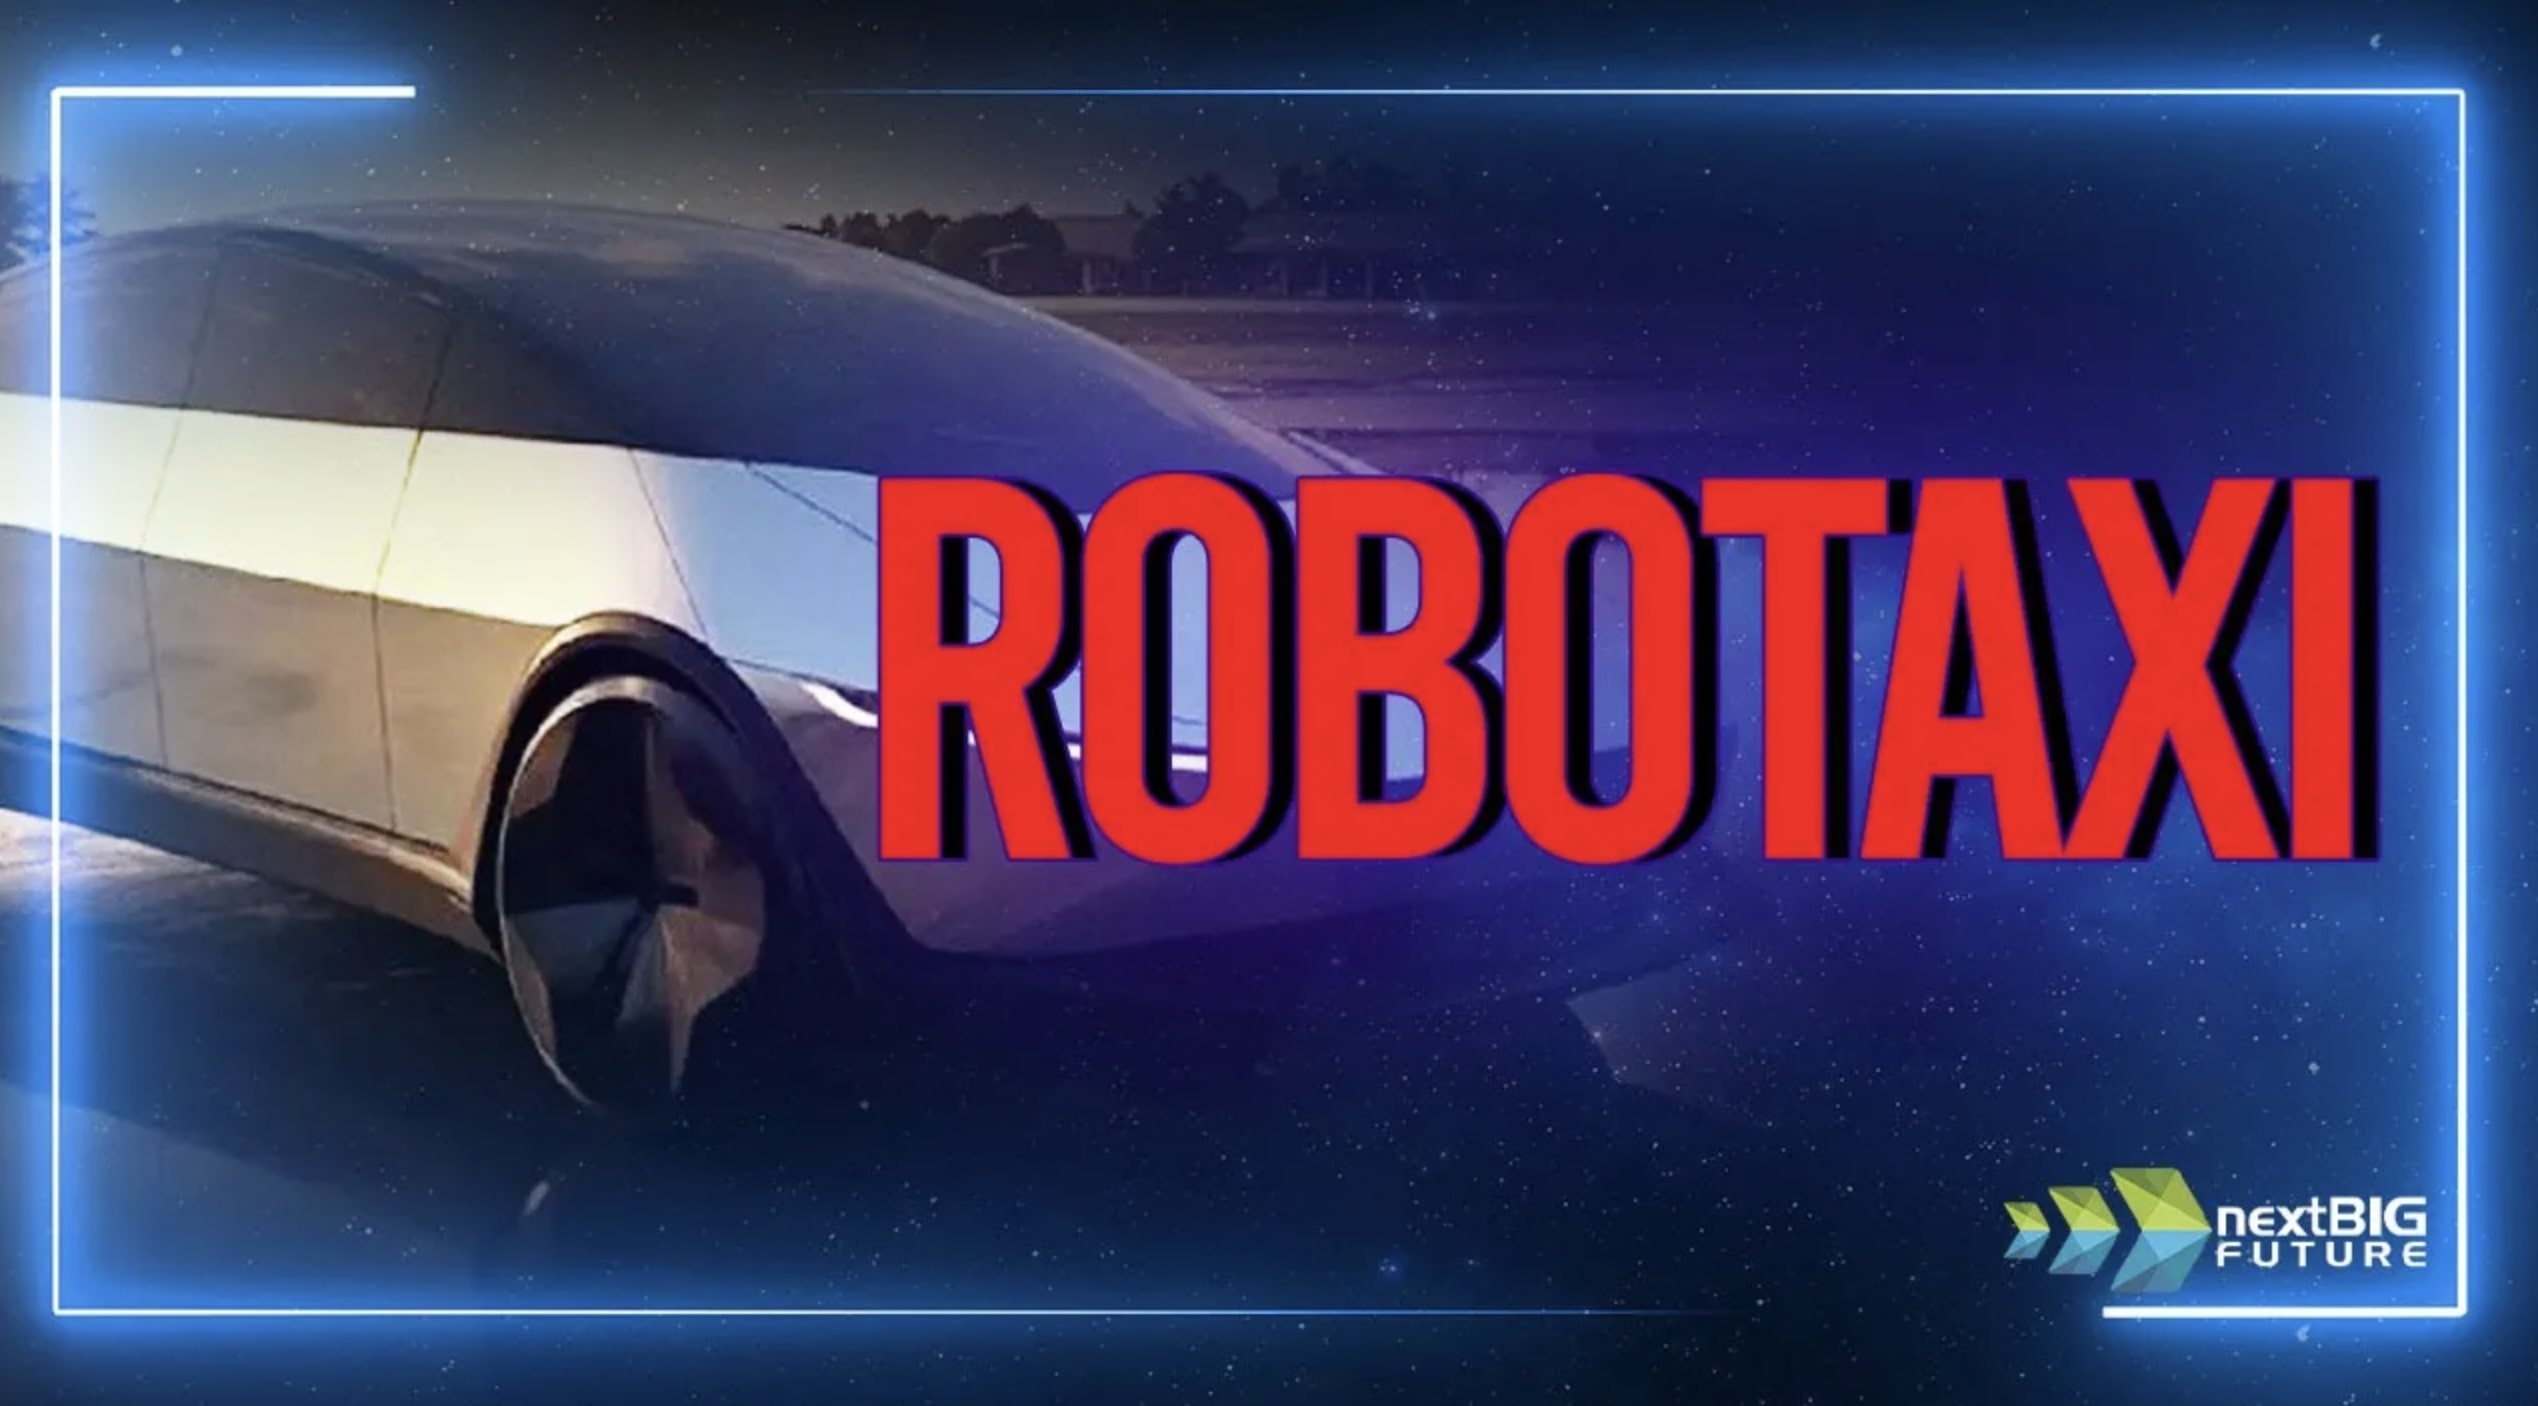 tesla-unveils-the-robotaxi-on-august-8-during-an-ongoing-fsd-ramp-what-is-known-and-unknown?-|-nextbigfuture.com